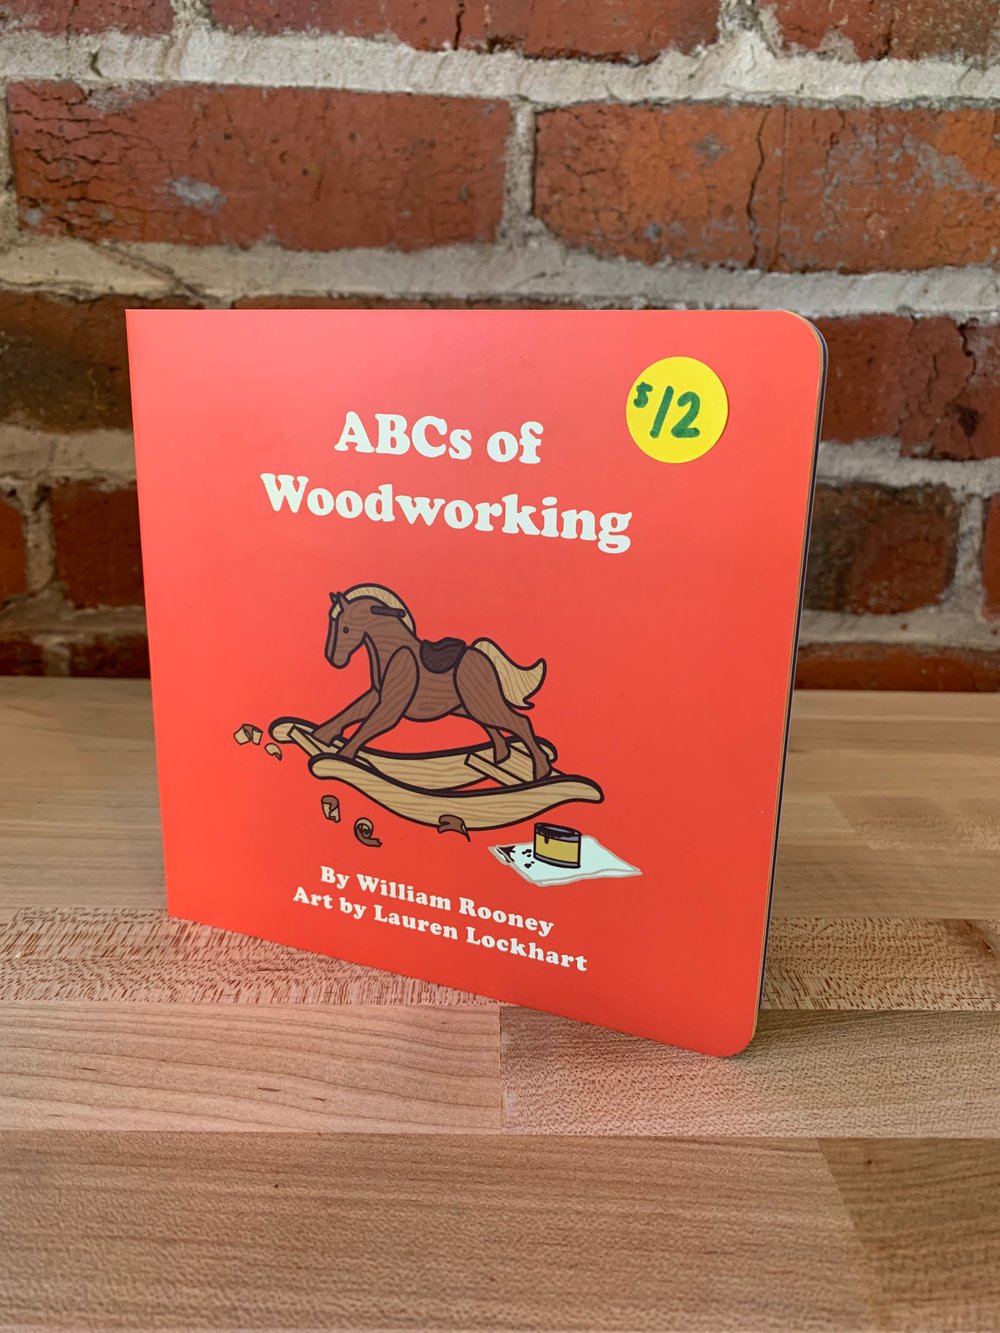 ABCs of Woodworking book